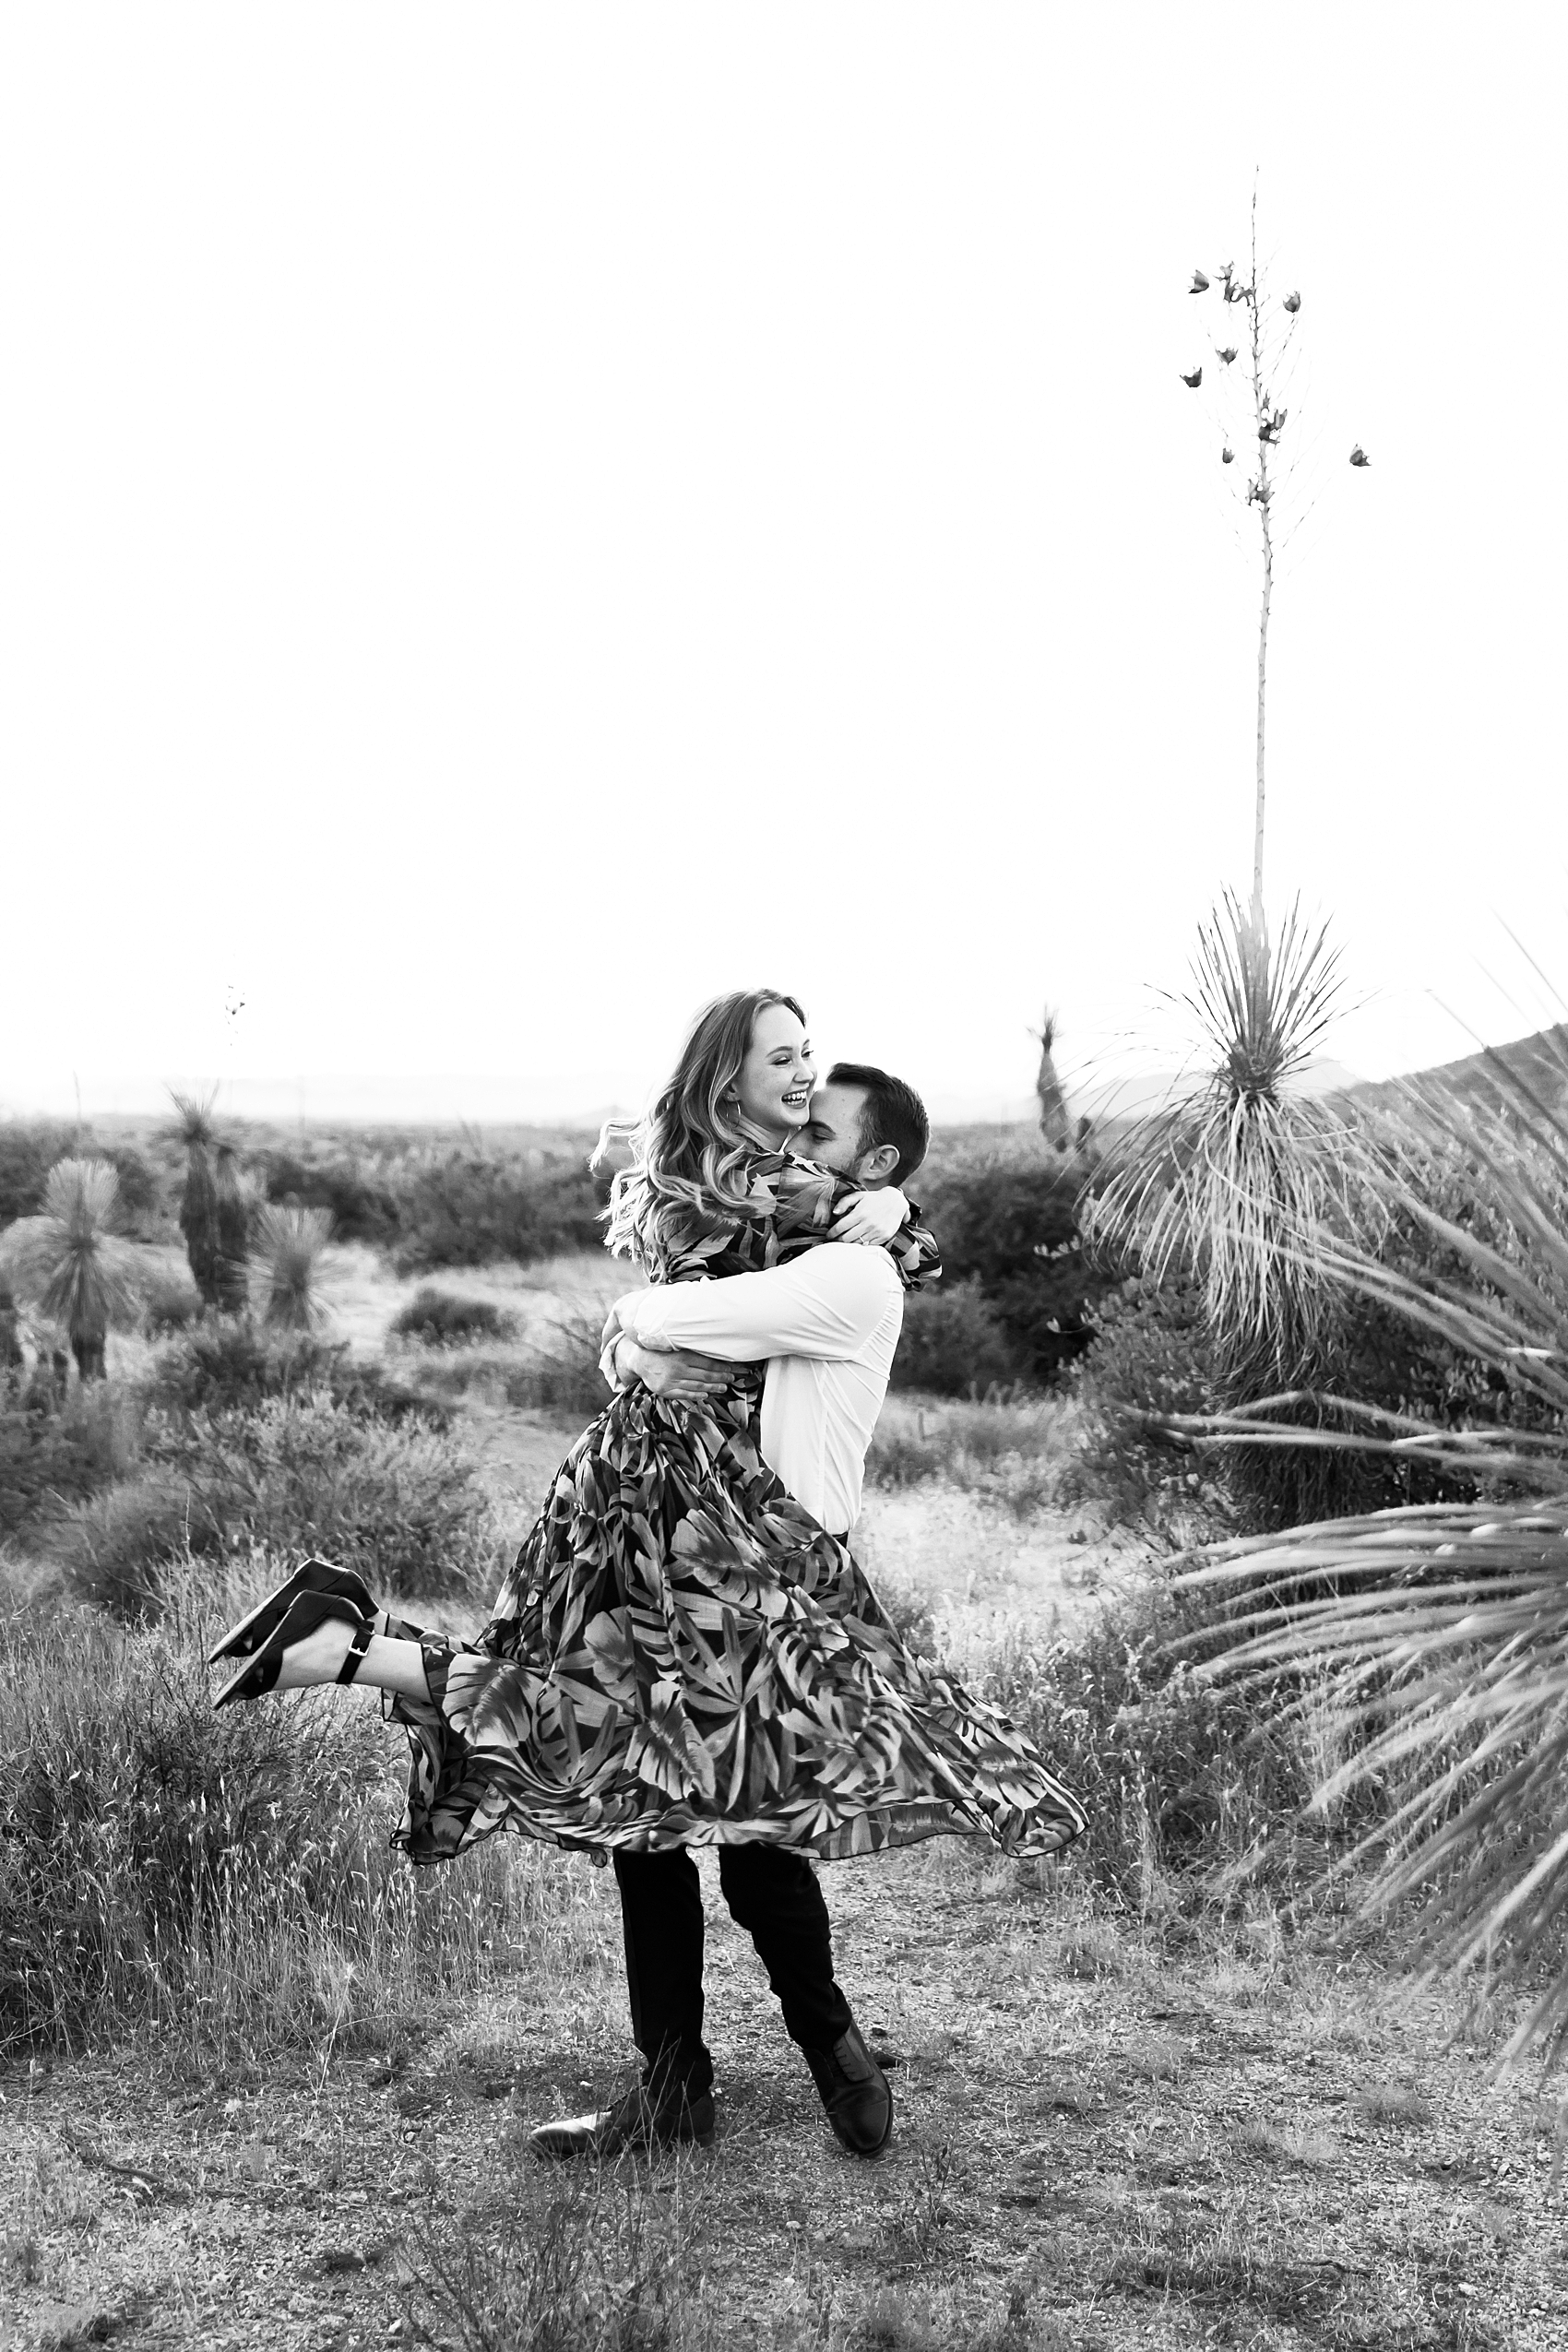 Leah Hope Photography | Scottsdale Phoenix Arizona | Desert Landscape Cactus Scenery Boulders | Couple Photos | In Love | Romantic Couple Pictures | Engagement Photos | Engaged | Proposal | Proposing Pictures | How He Asked | What to Wear | How to Pose | Couple Poses Posing | Portrait Photographer | Engagement Photography | Surprise Proposal